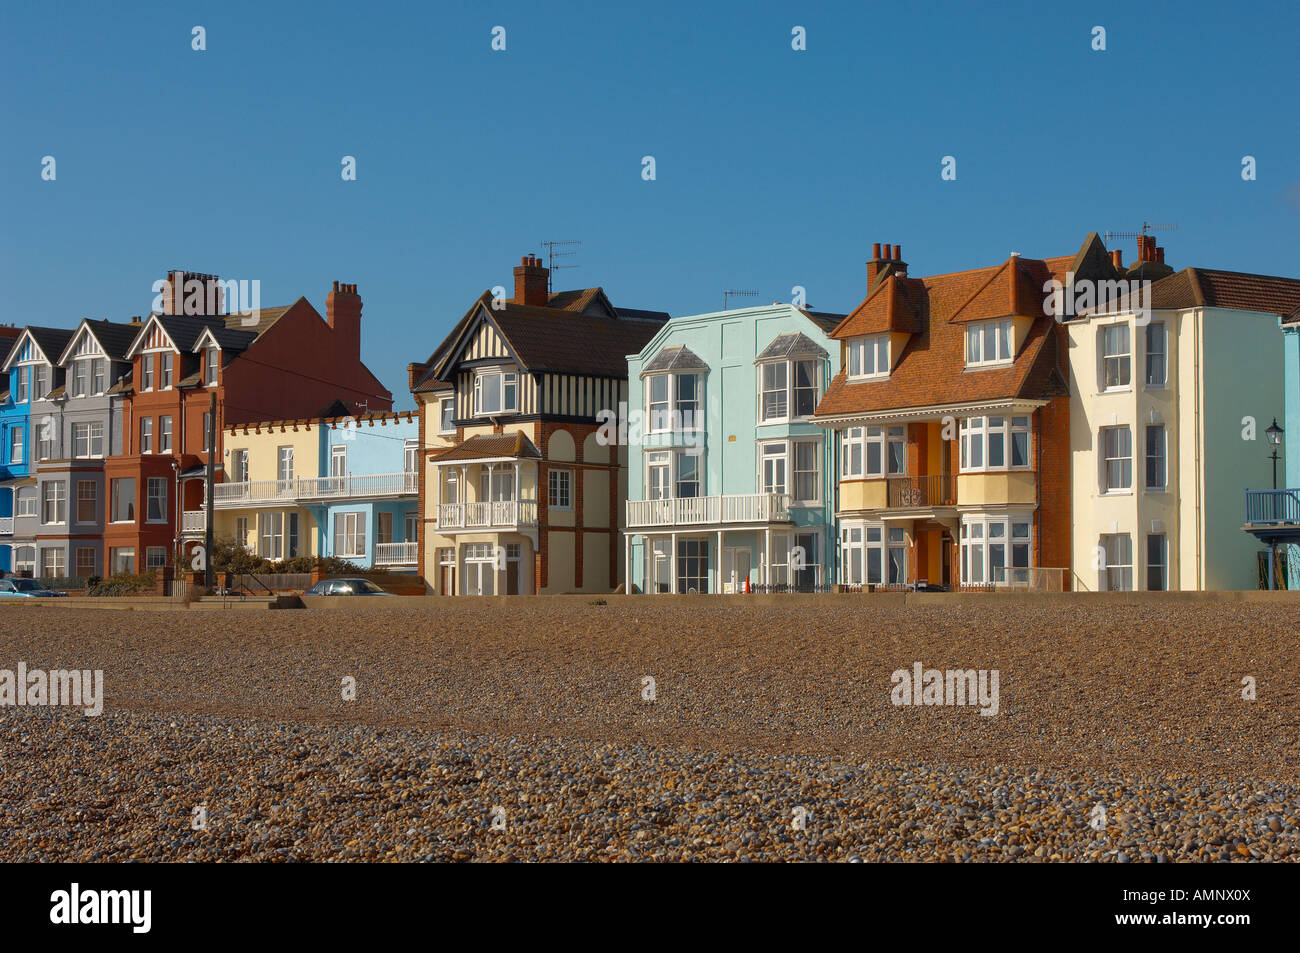 Brightly colored painted house and cottage on the sea front beach at Aldeburgh, East Anglia, Suffolk, England Stock Photo